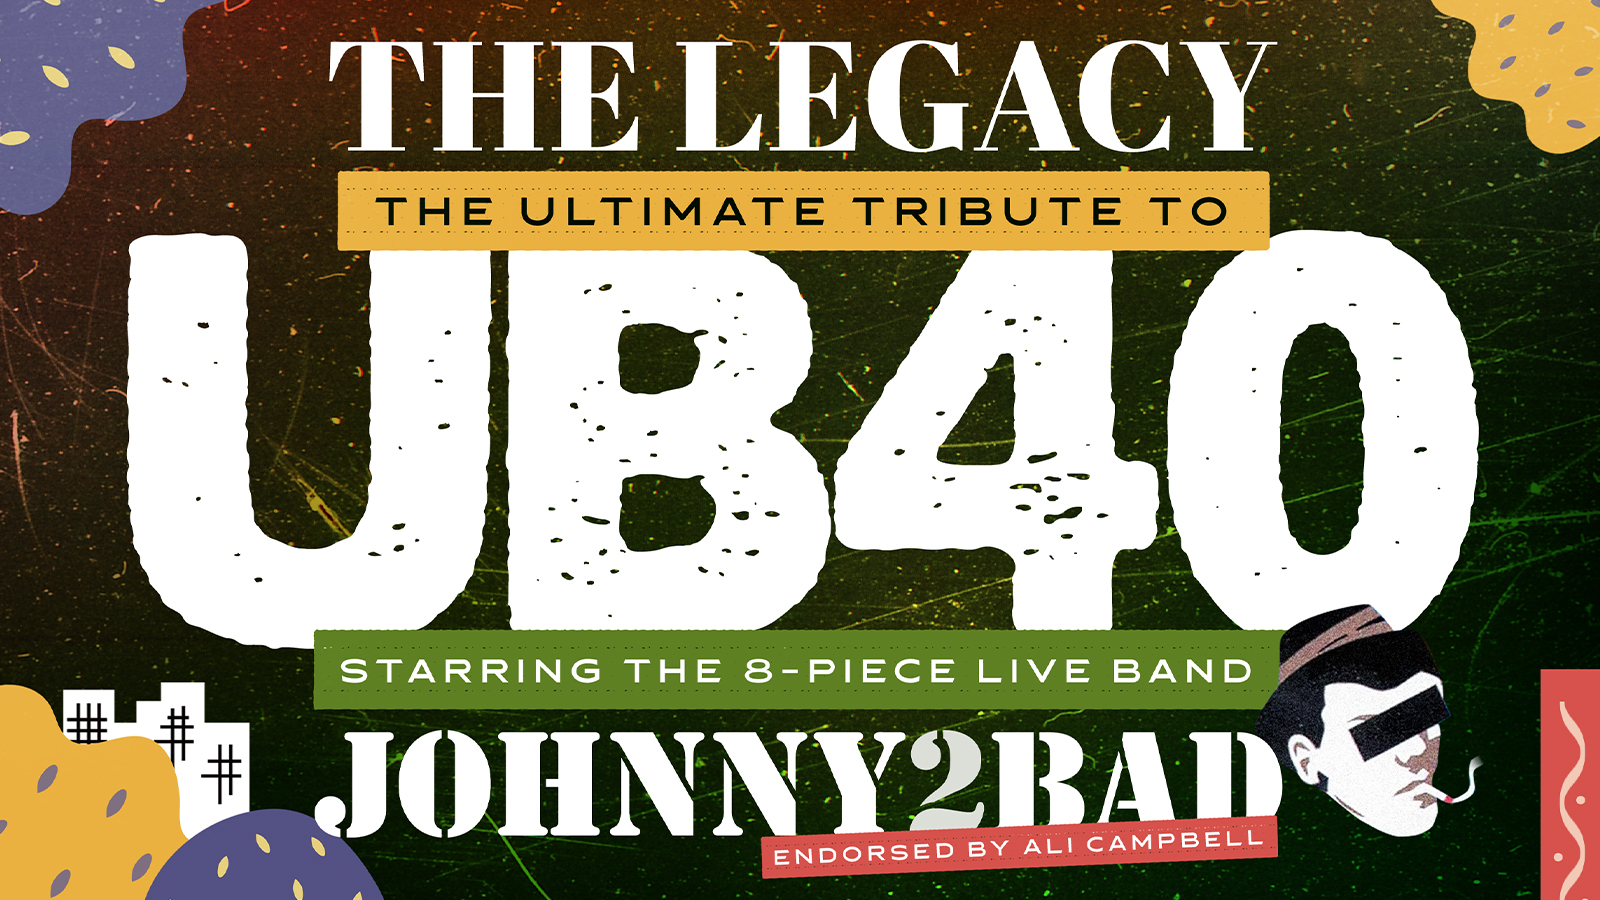 🚨 LAST FEW TICKETS! ❤️💛💚 The Legacy of UB40’s – Greatest Hits Show starring JOHNNY 2 BAD – endorsed by Ali Campbell